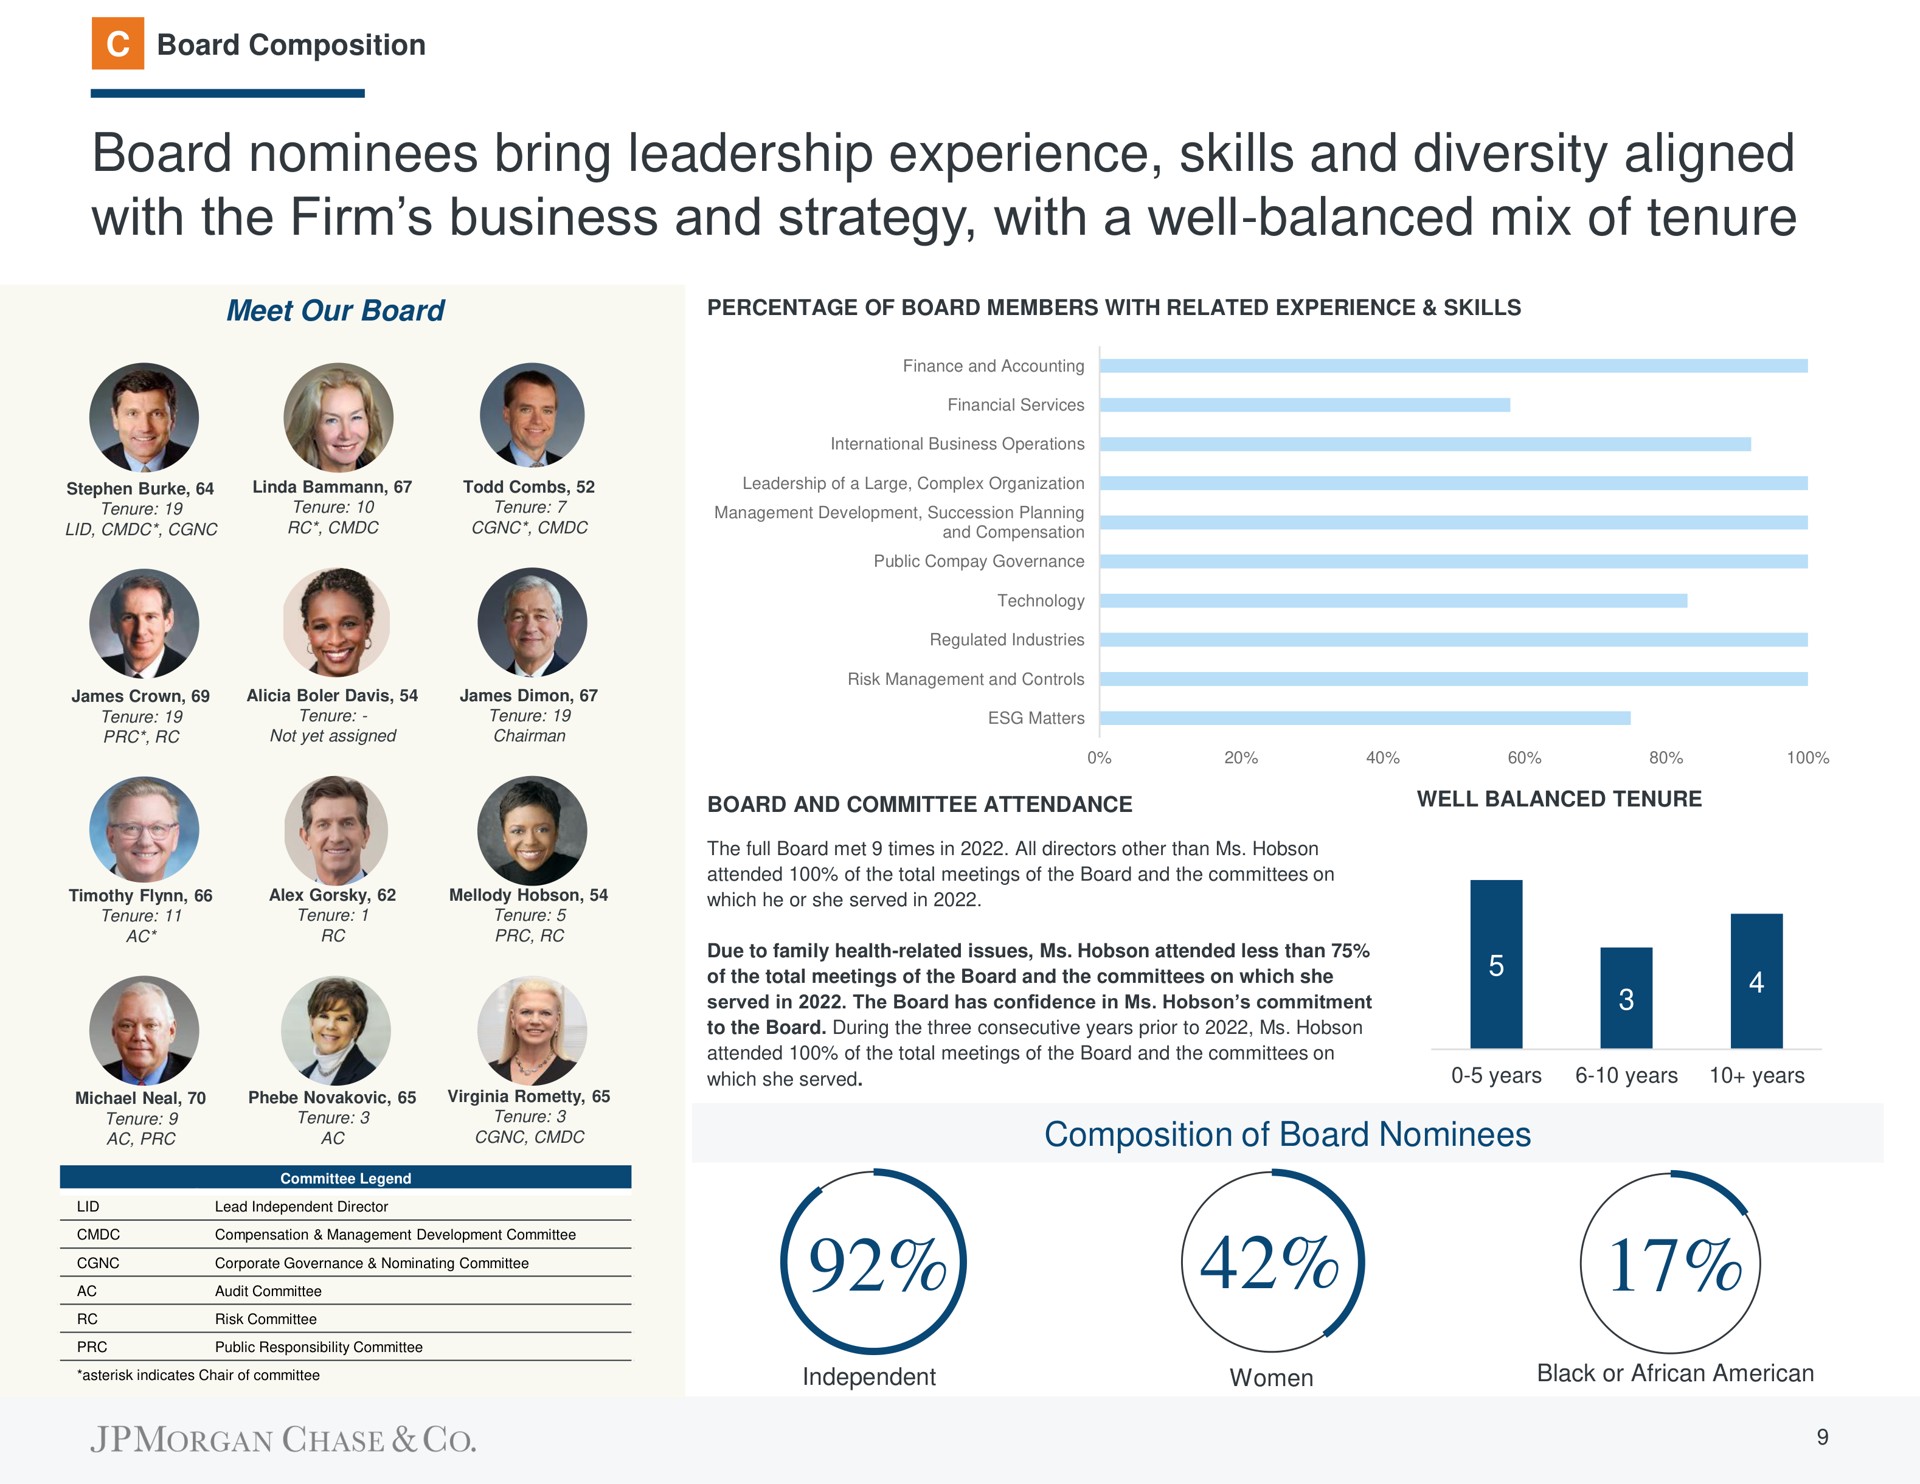 board nominees bring leadership experience skills and diversity aligned with the firm business and strategy with a well balanced mix of tenure | J.P.Morgan